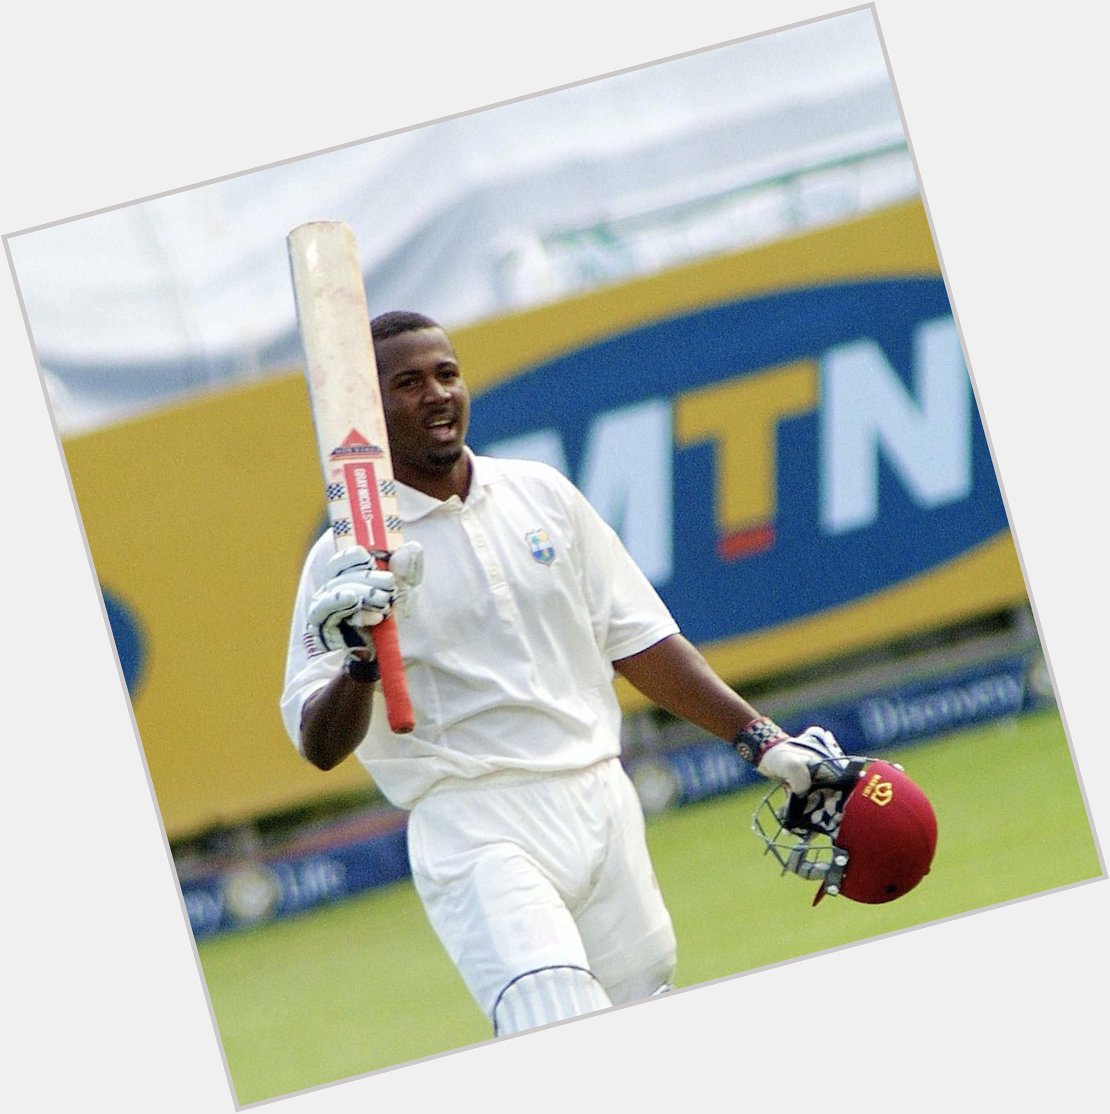 He needed just 93 balls to score a century on Test debut - Happy Birthday, Dwayne Smith! 